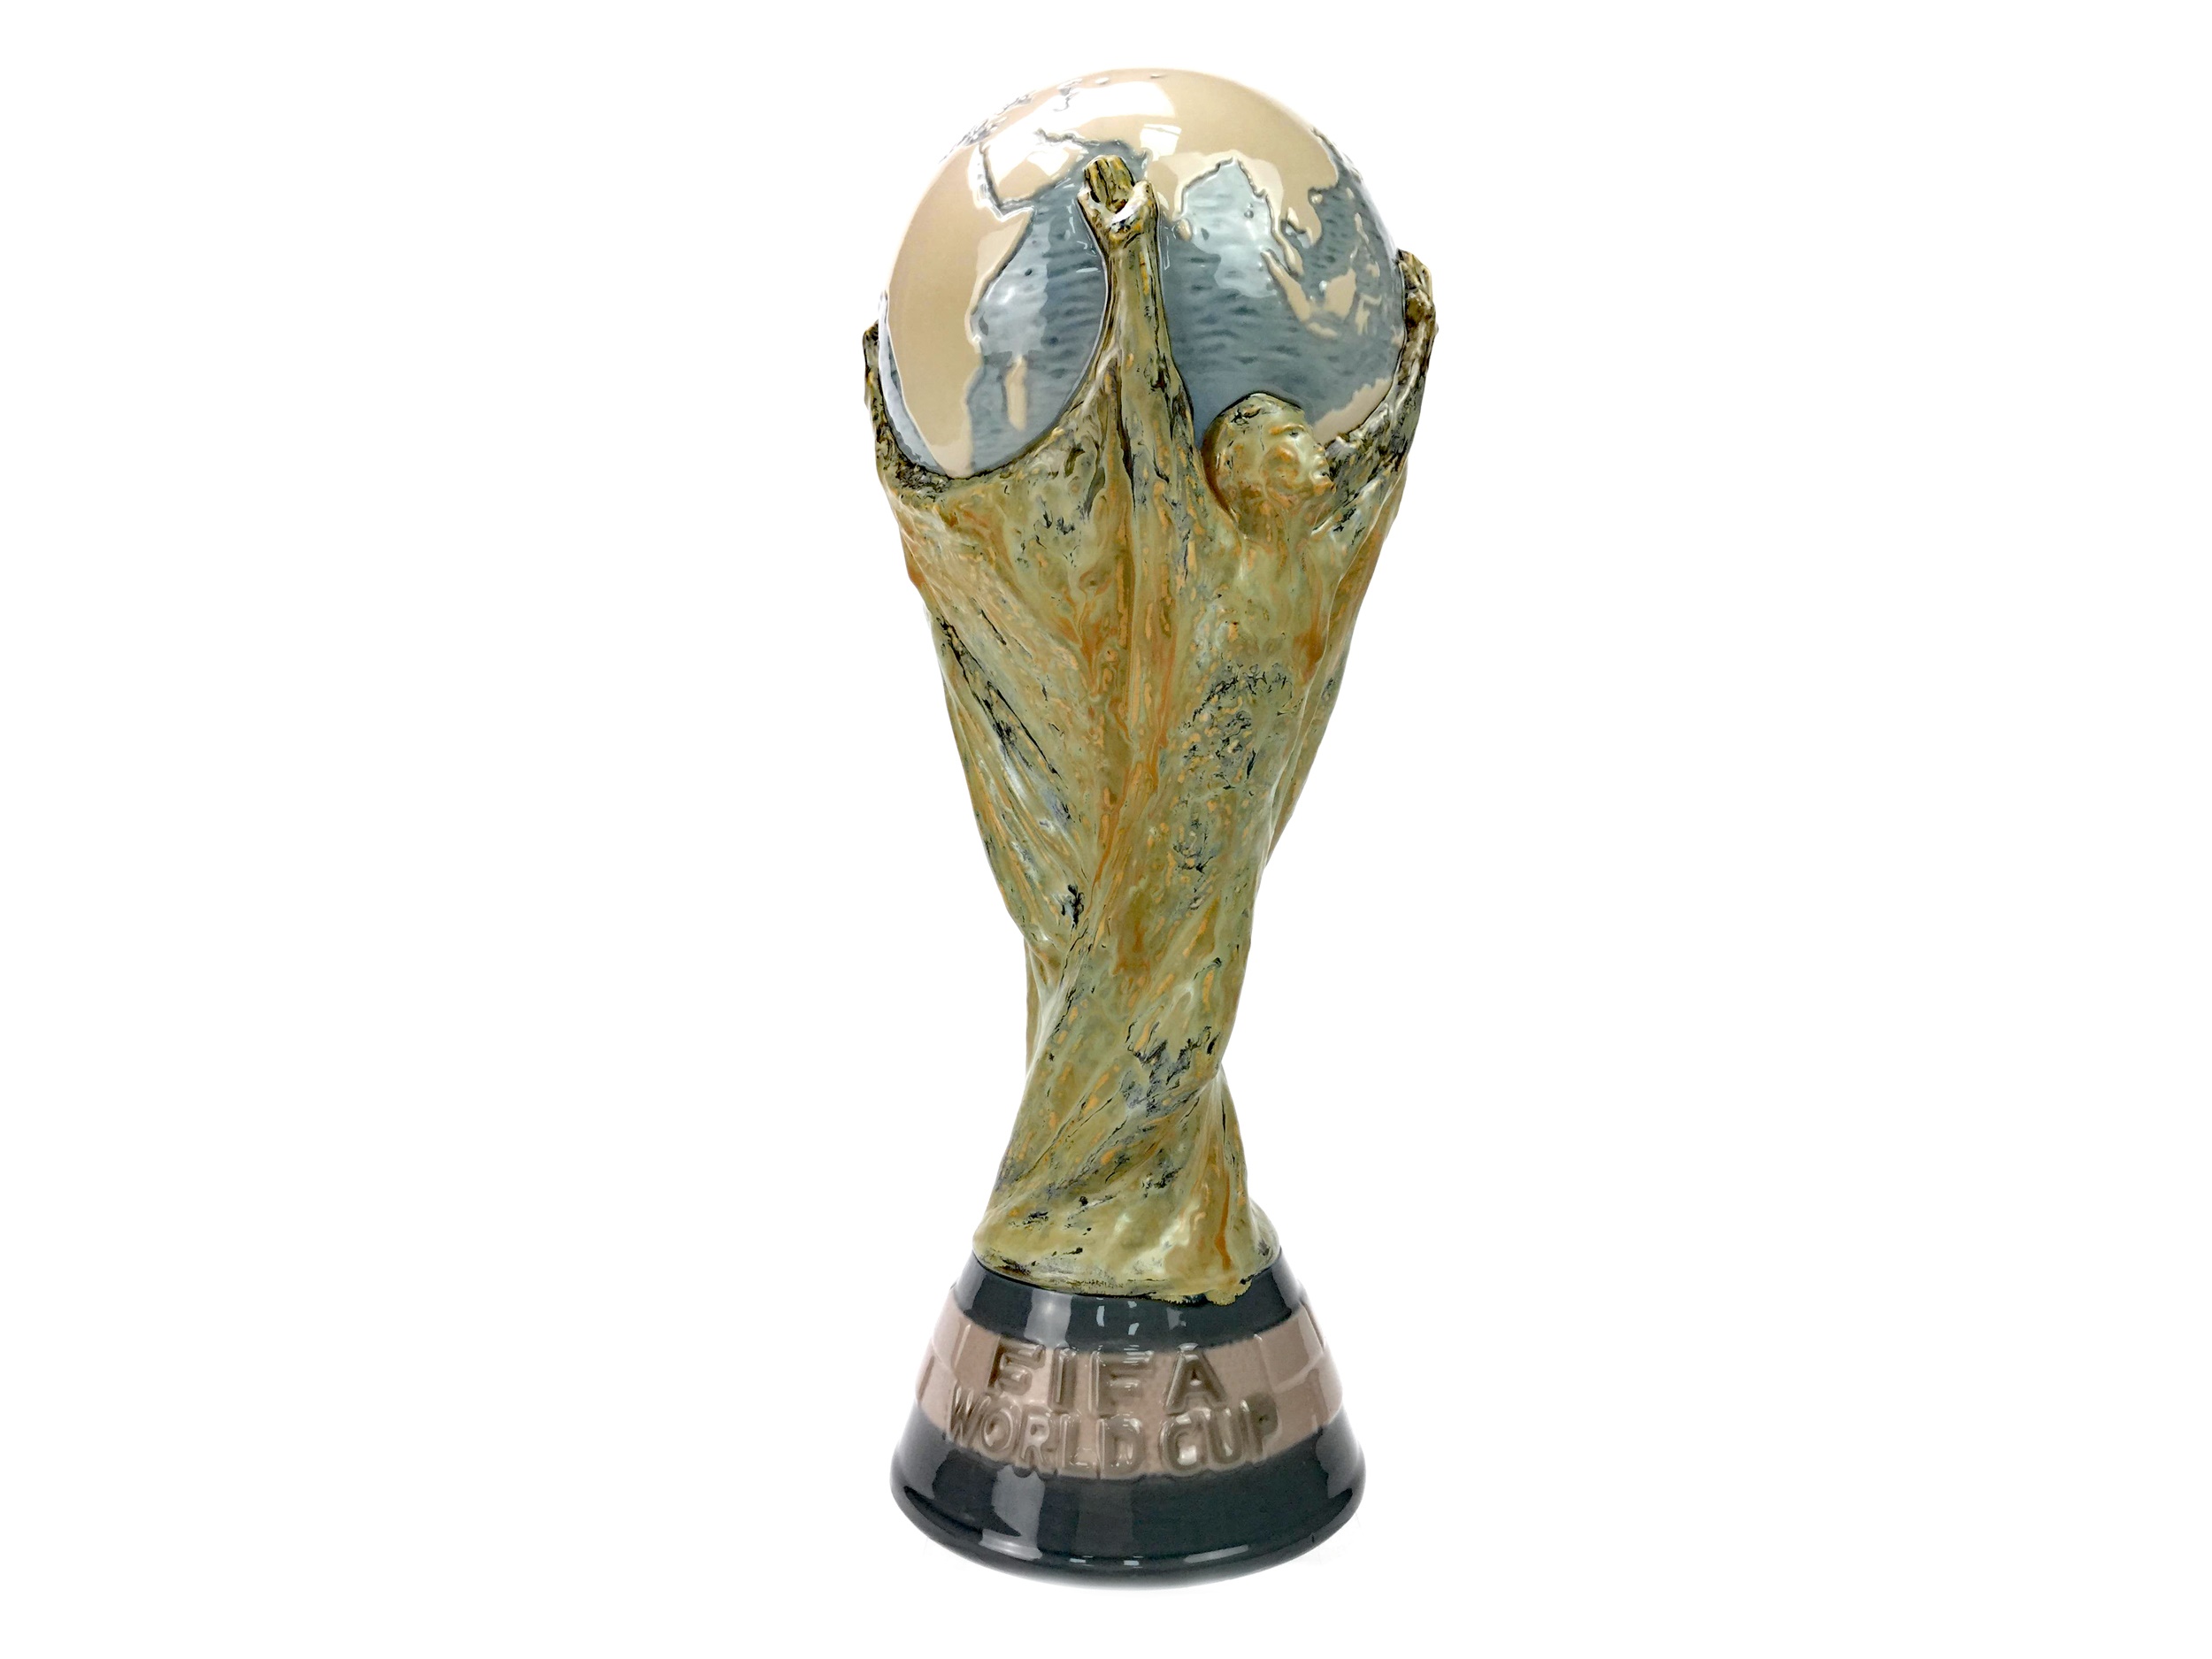 A LLADRO PORCELAIN MODEL OF THE FIFA WORLD CUP TROPHY